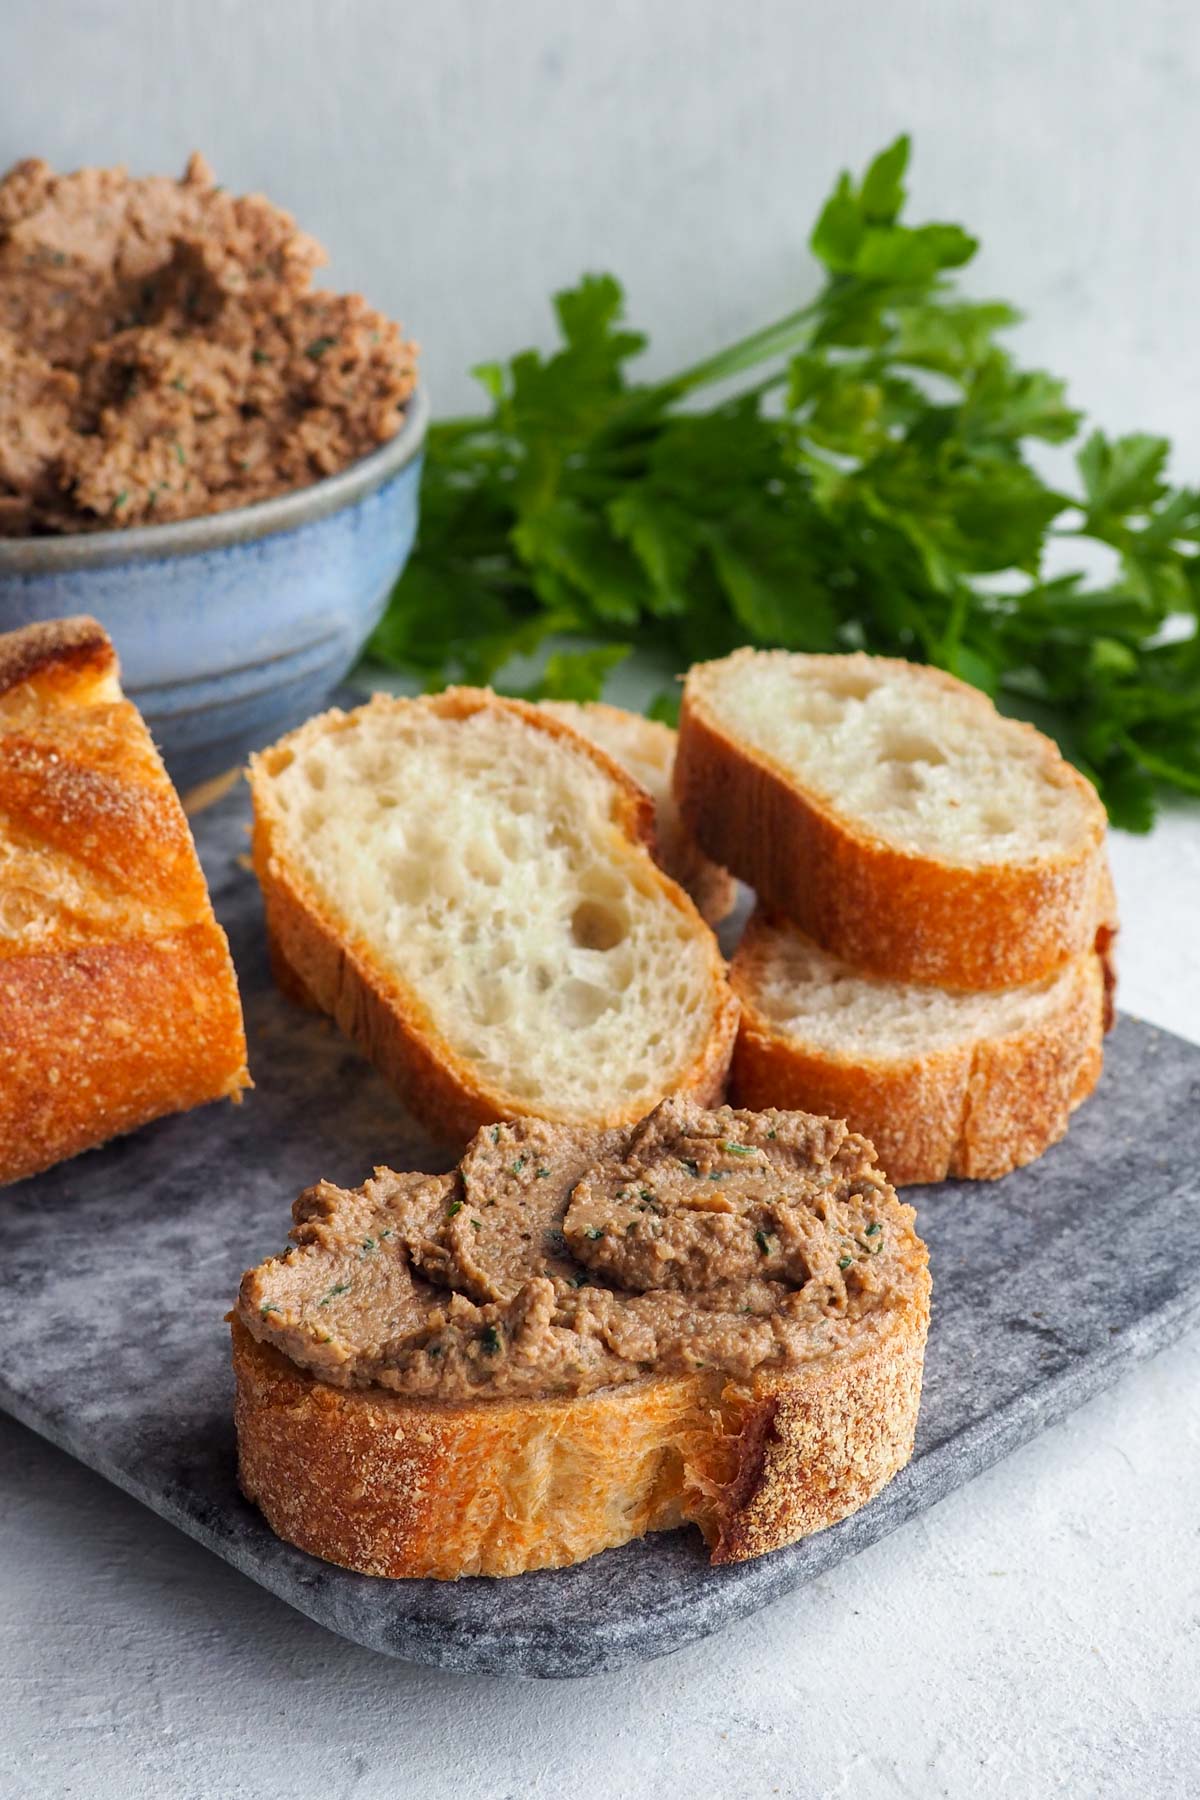 A vegan recipe of tahini spread served with bread and topped with fresh parsley, perfect for a holiday gathering.